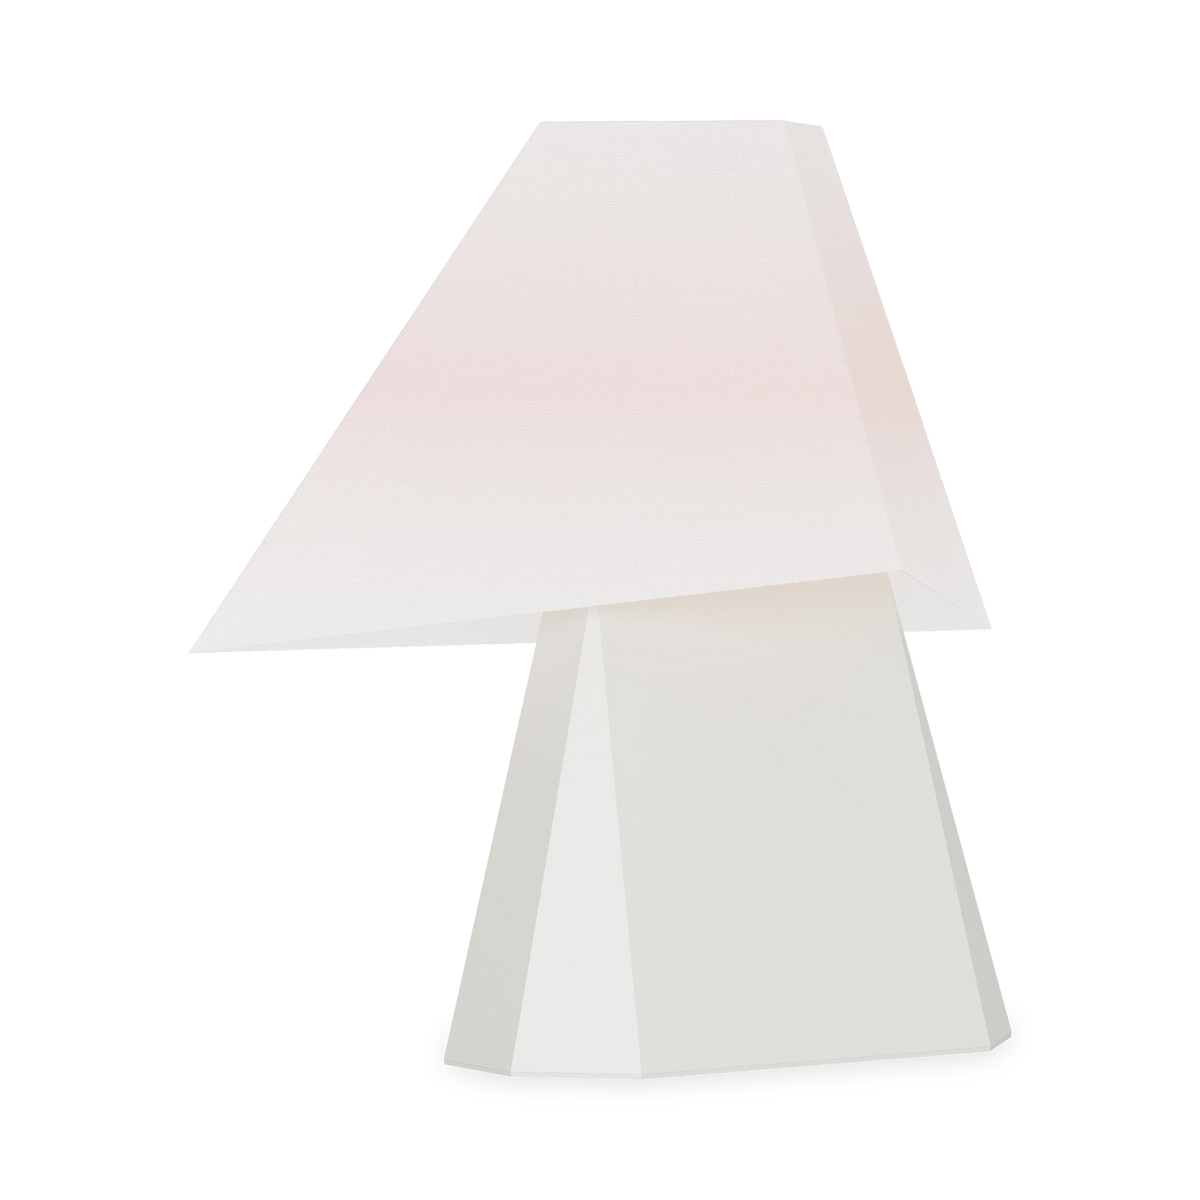 Edged, unique and eye-catching, the Herrero Table Lamp is an attention-catching table lamp.